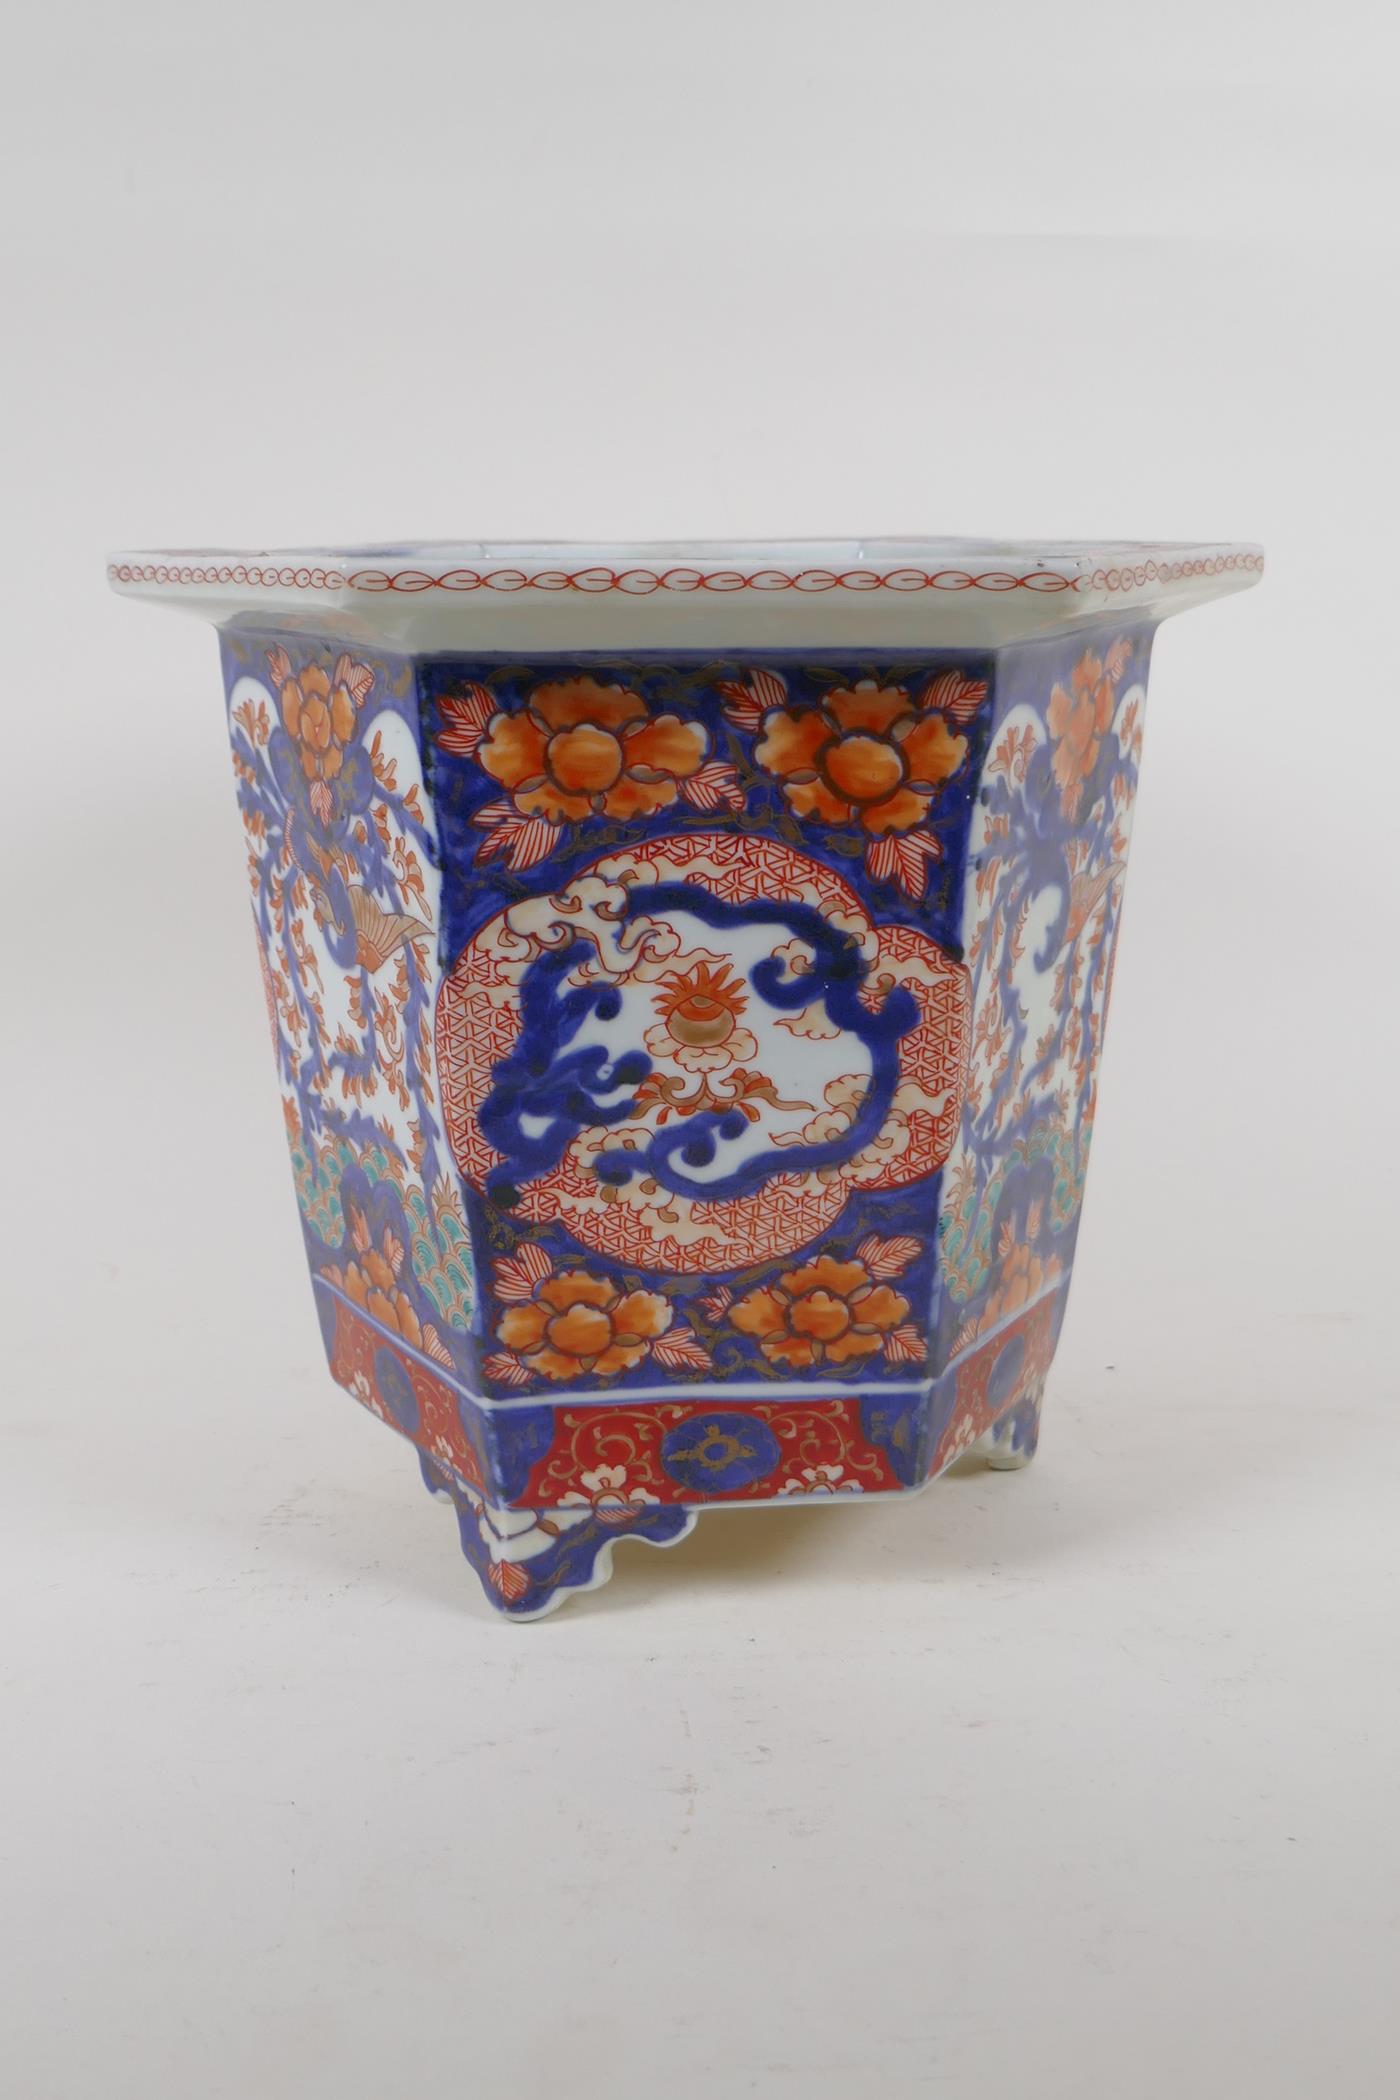 A C19th Chinese Imari porcelain planter of hexagonal form, with phoenix and floral decorative - Image 3 of 6